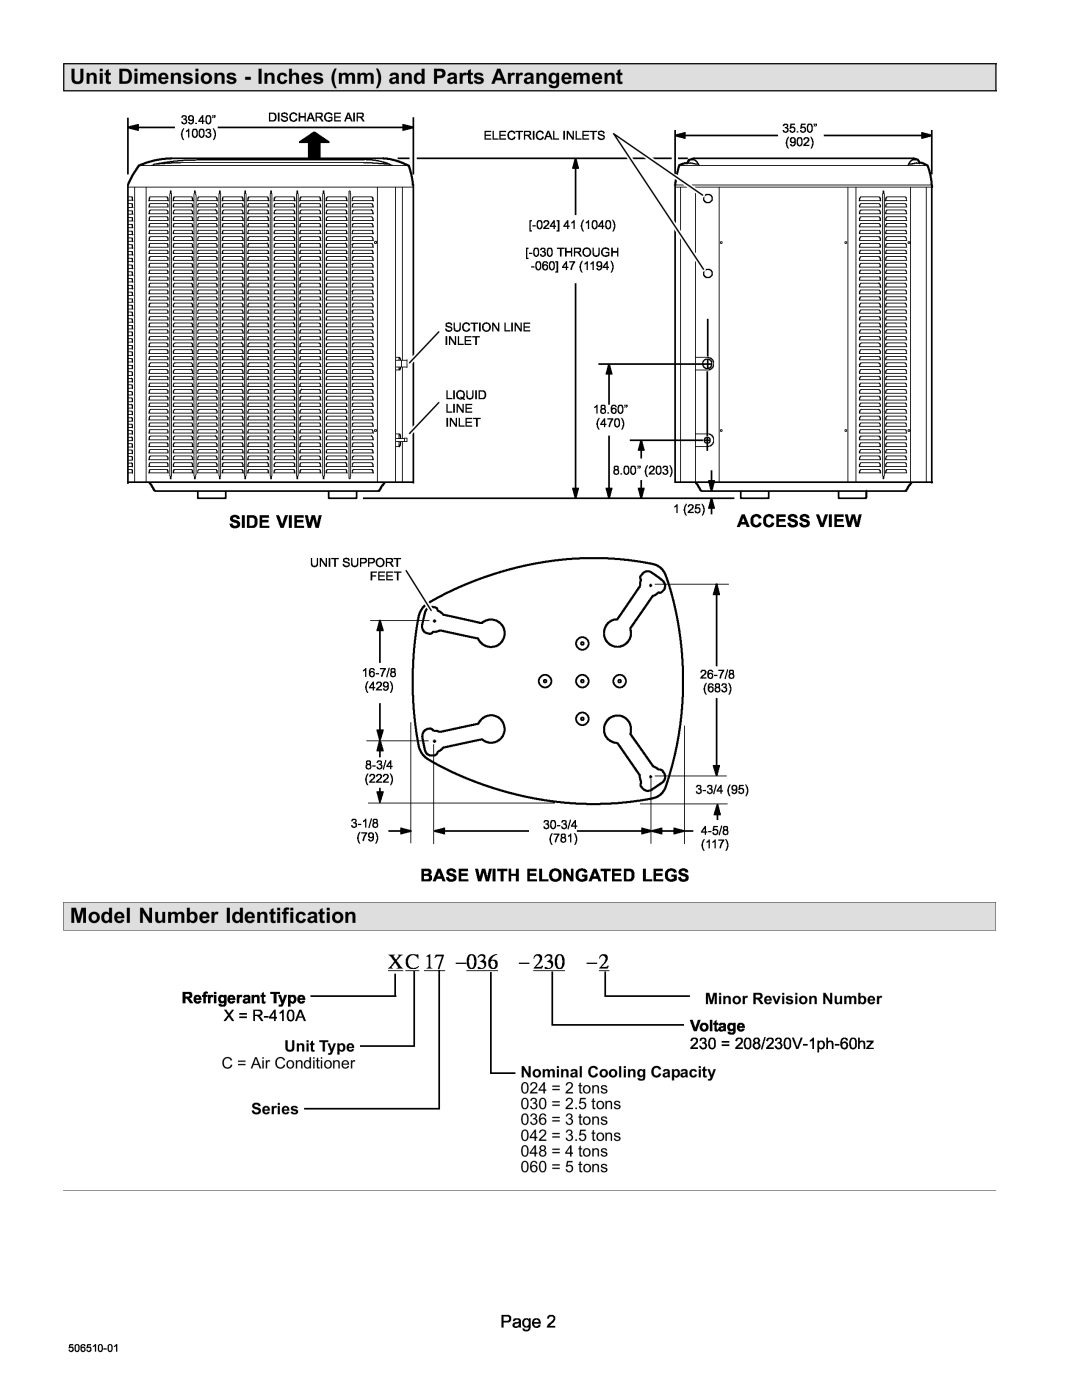 Lennox International Inc 506510-01 Unit Dimensions − Inches mm and Parts Arrangement, Model Number Identification 